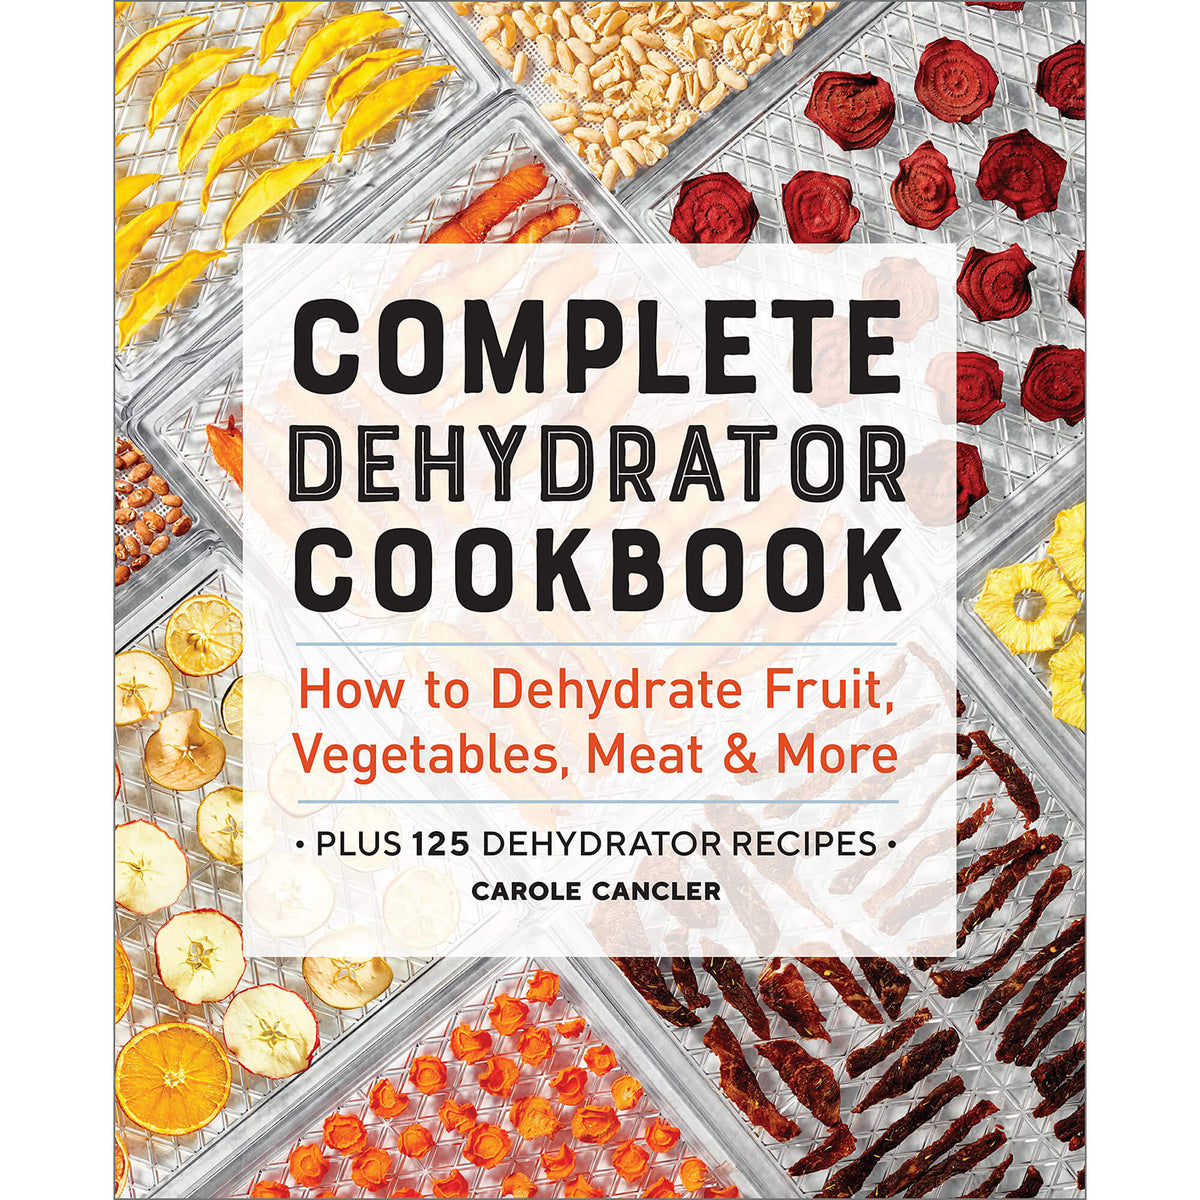 Complete Dehydrator Cookbook front cover